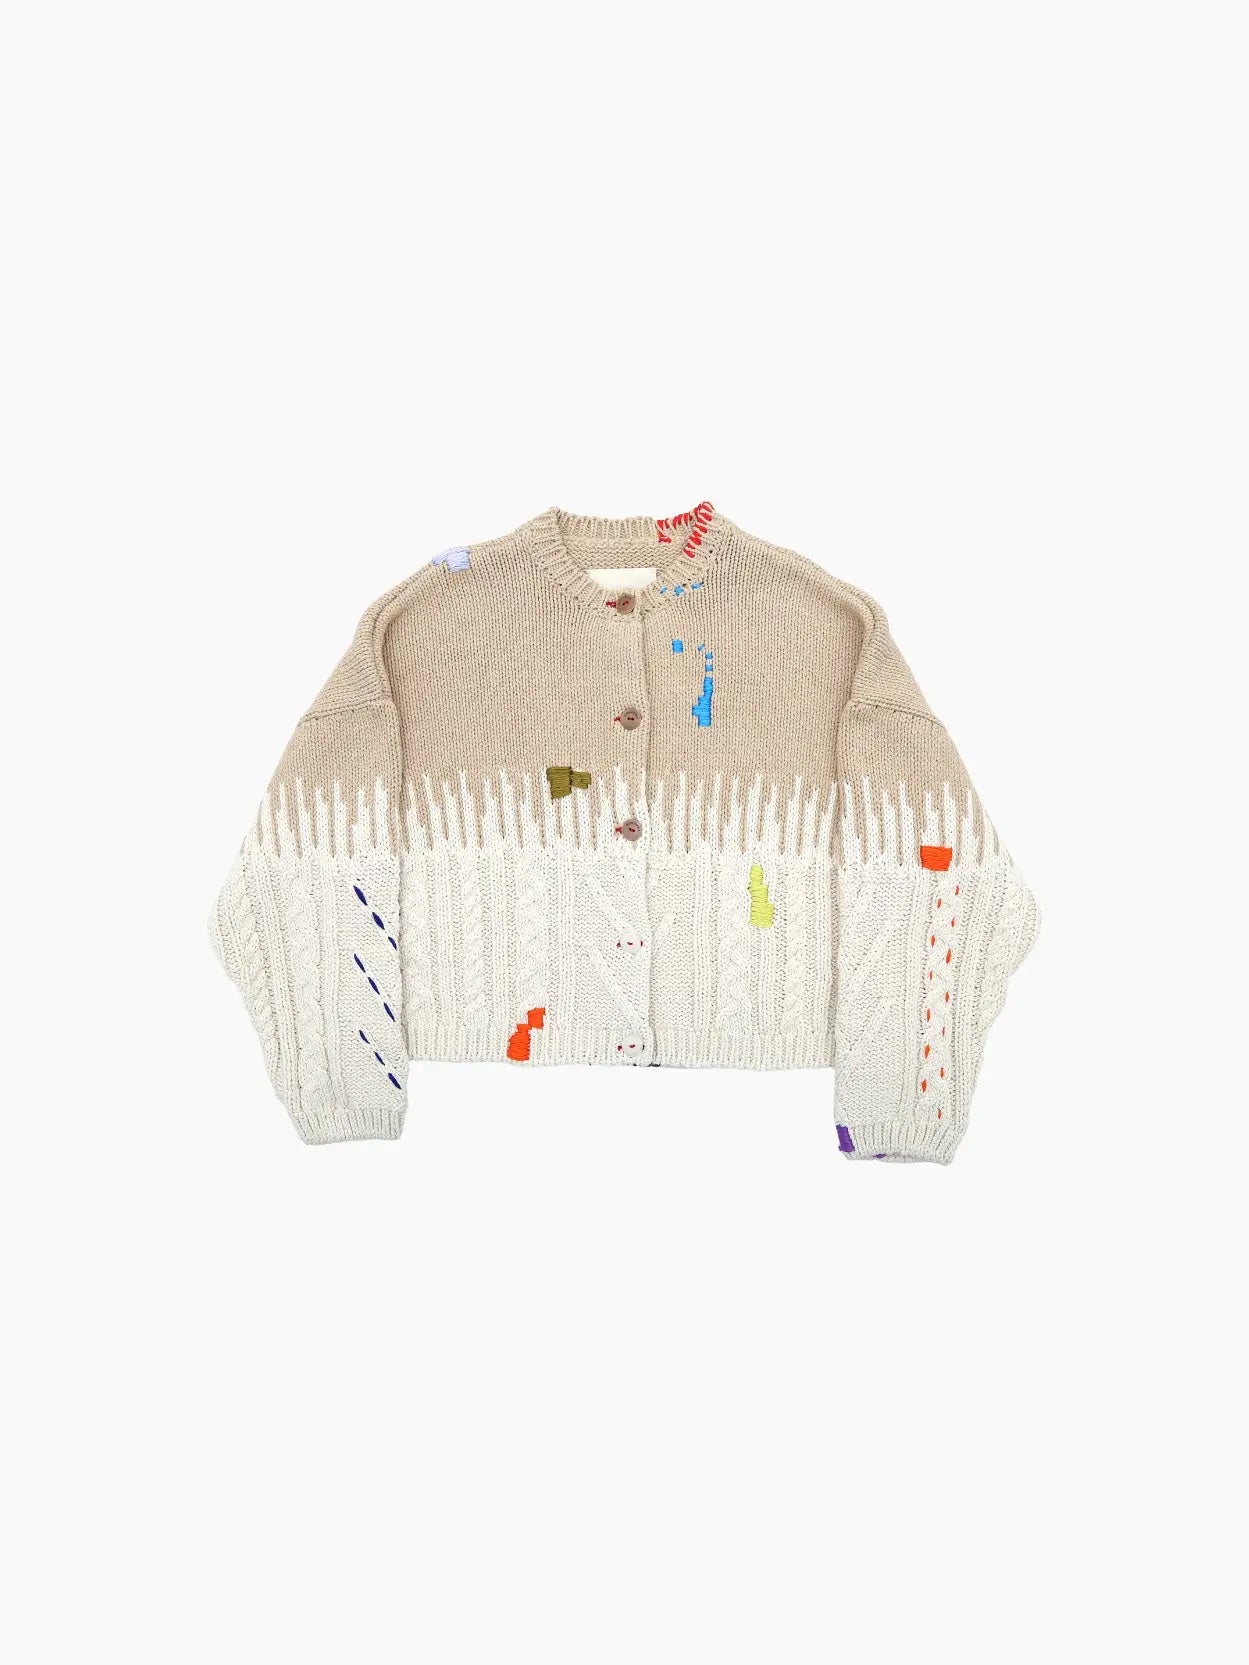 A beige and white knit cardigan with a mix of cable knit and ribbed textures, featuring colorful abstract patches in orange, blue, yellow, and purple. This chic piece from Cordera boasts brown buttons on its button-down front and a round neckline—perfect for adding Barcelona flair to your wardrobe.